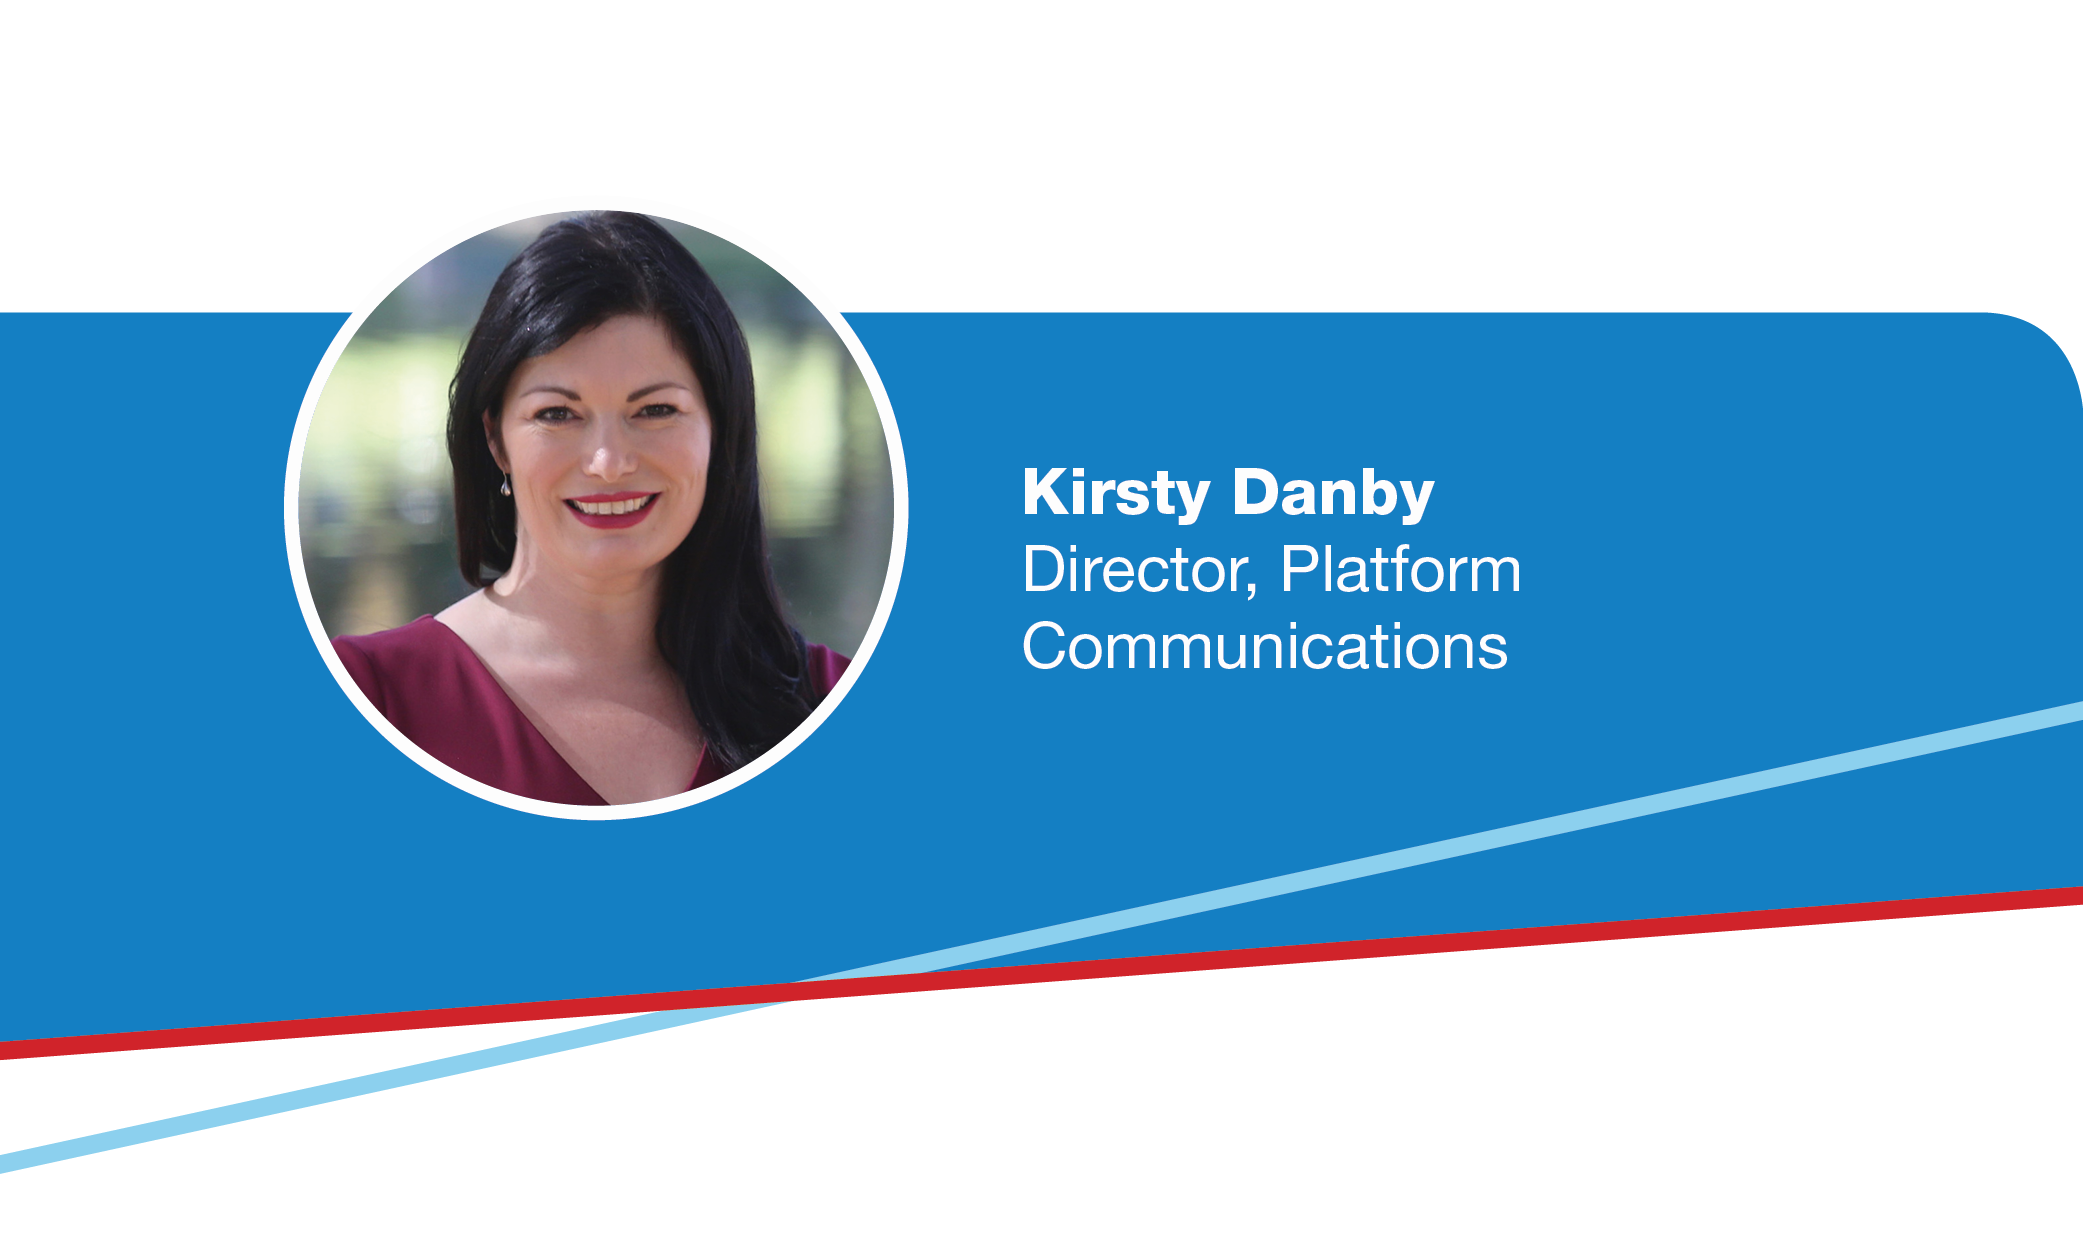 Join Platform’s Director Kirsty Danby at IMARC 2018